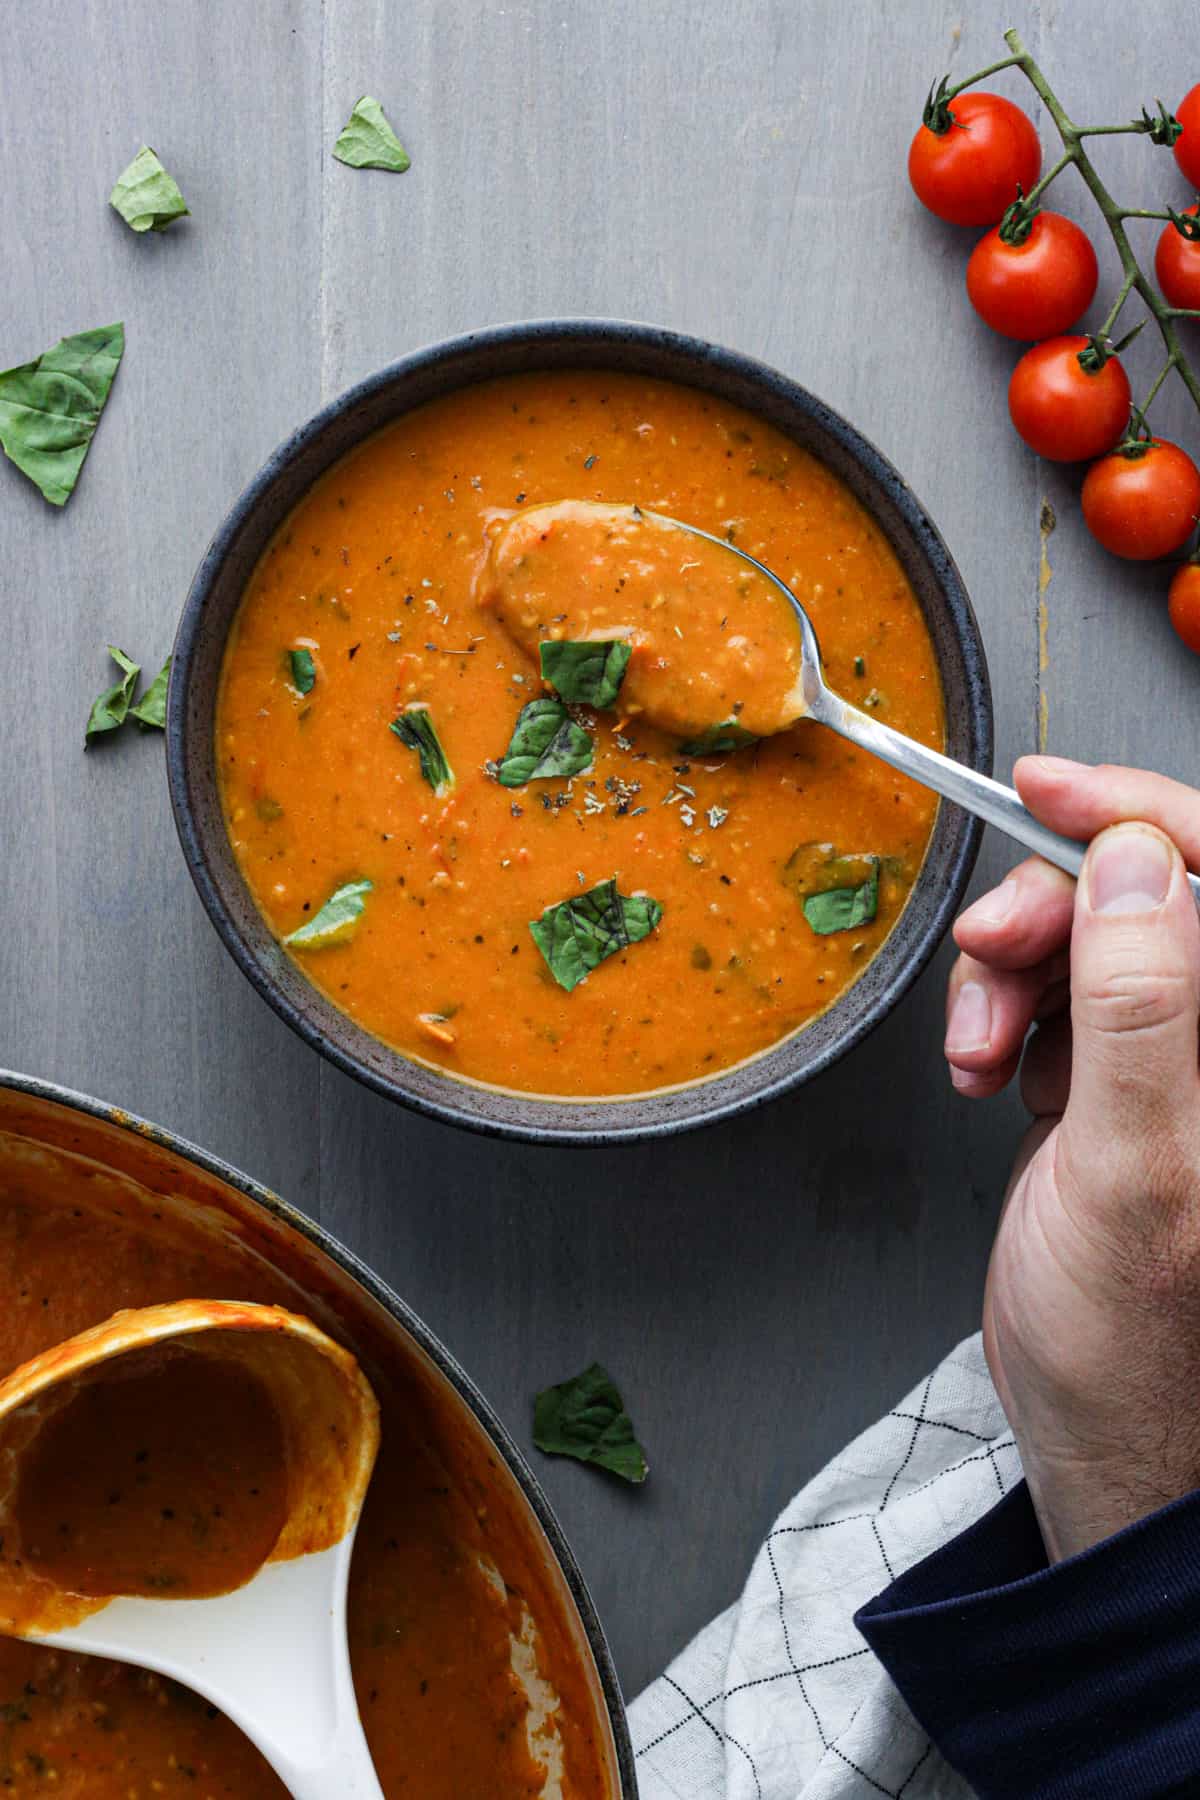 Cherry Tomato Soup in a gray bowl with a hand taking a spoonful of the soup.